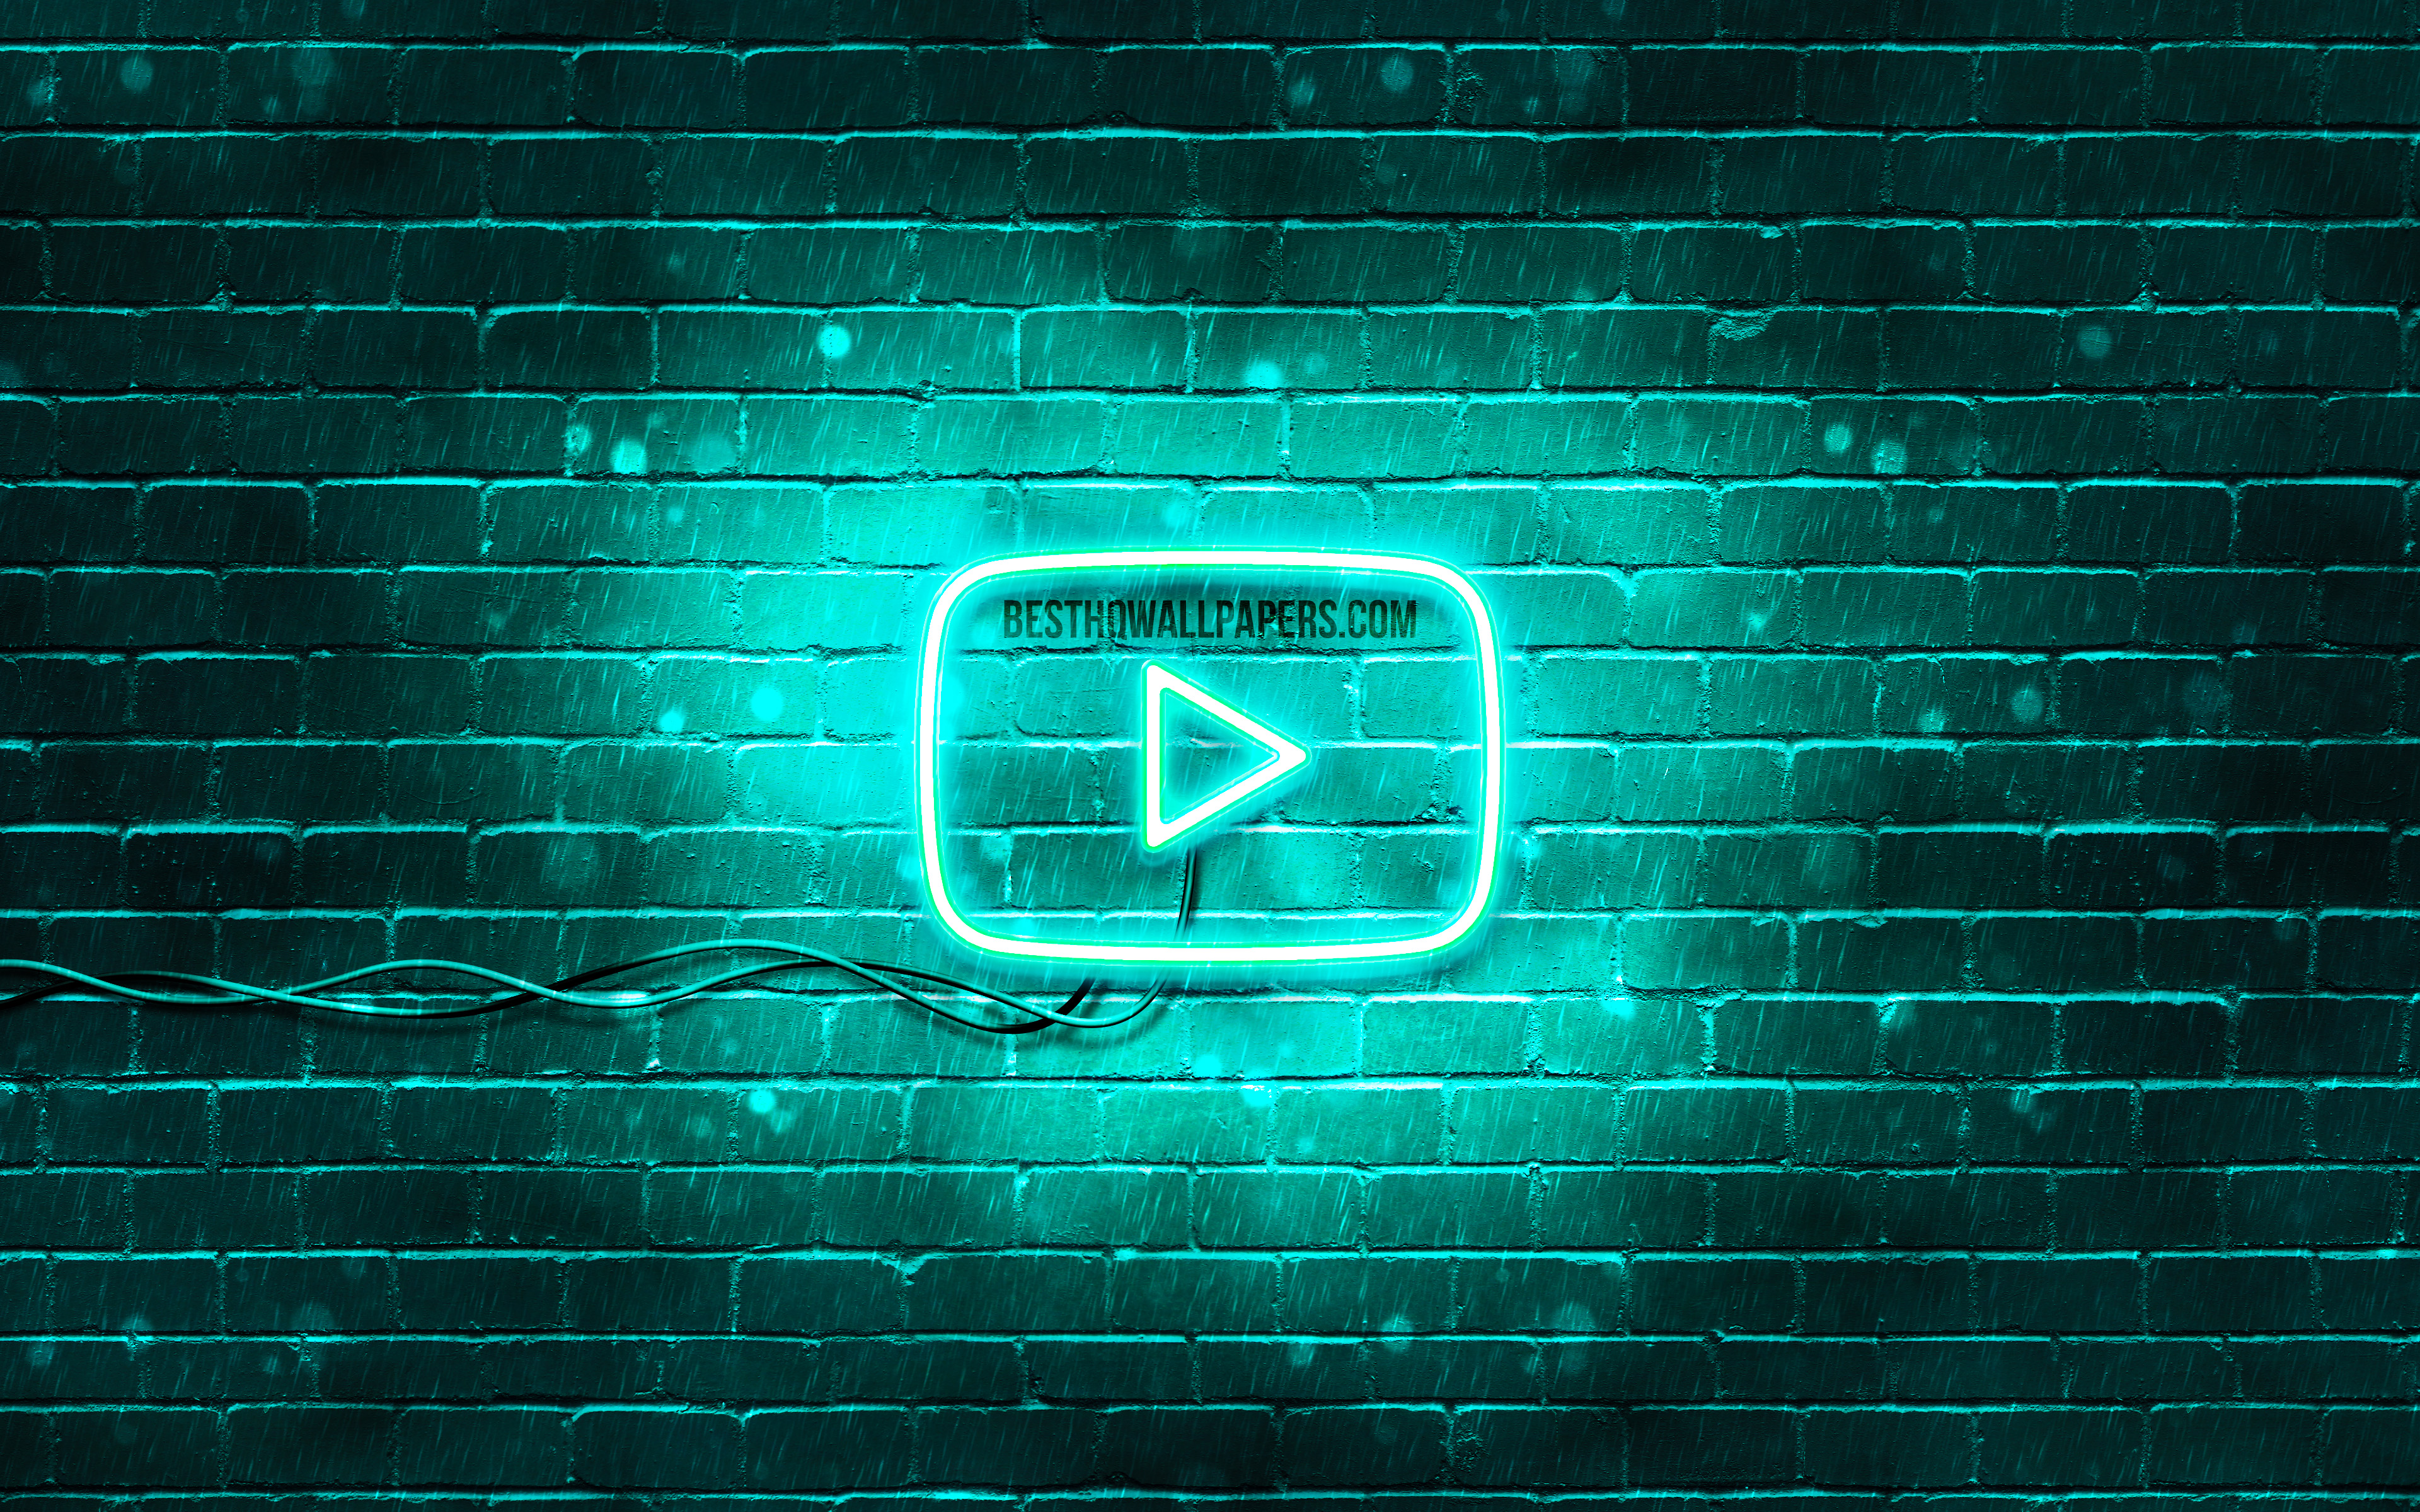 Download wallpaper Youtube turquoise logo, 4k, turquoise brickwall, Youtube logo, brands, Youtube neon logo, Youtube for desktop with resolution 3840x2400. High Quality HD picture wallpaper